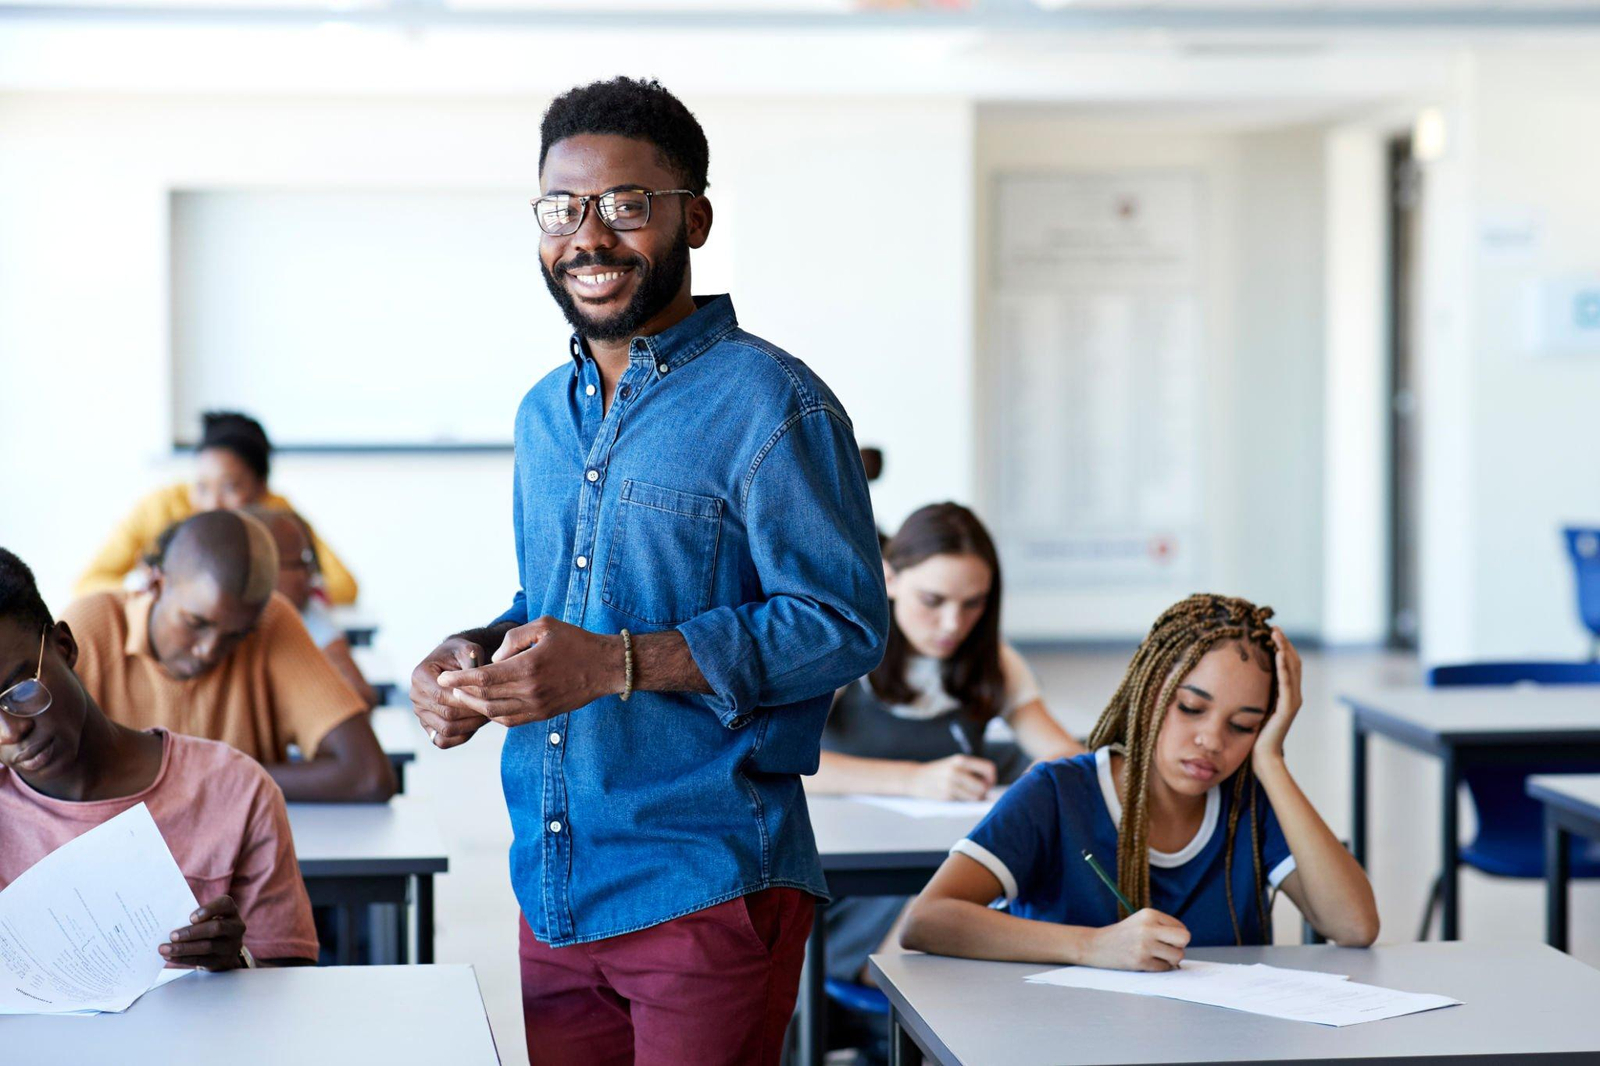 https://www.gettyimages.com/detail/photo/smiling-supervisor-amidst-students-writing-exam-royalty-free-image/1171160396?phrase=class%20teacher&adppopup=true